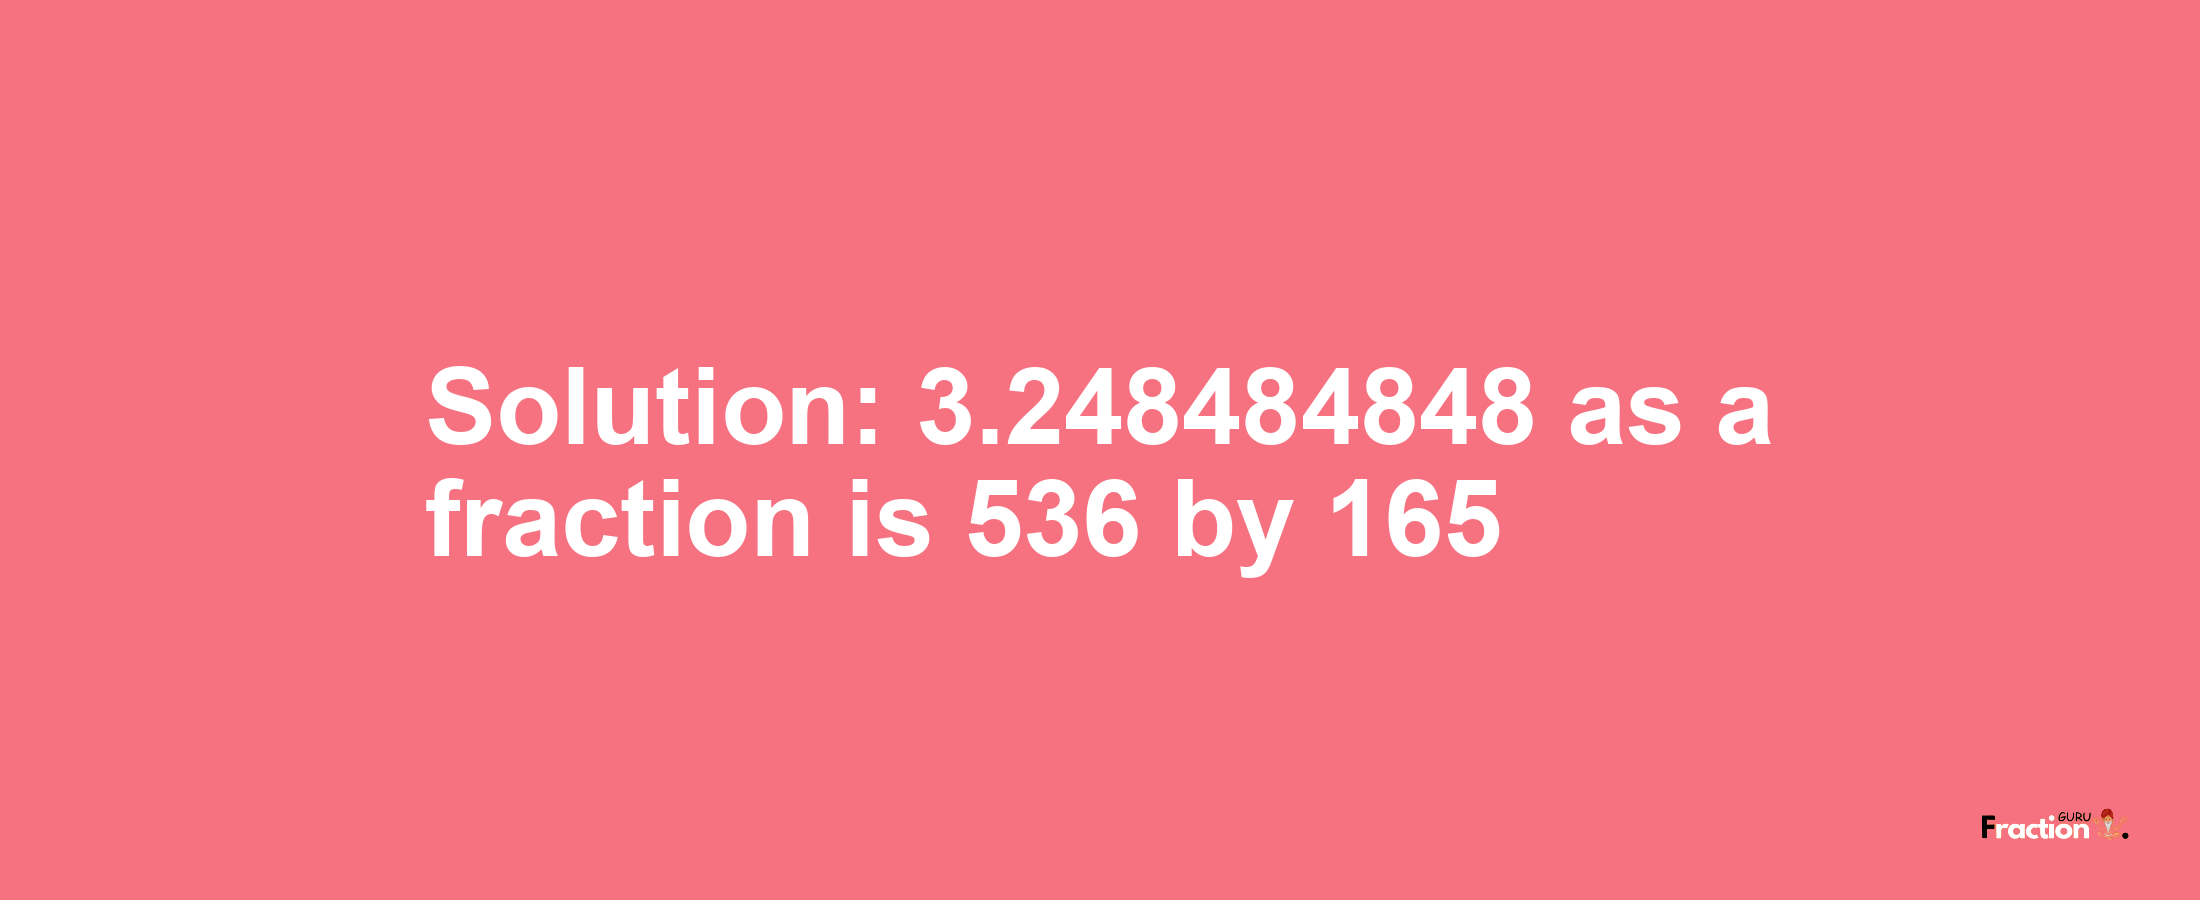 Solution:3.248484848 as a fraction is 536/165